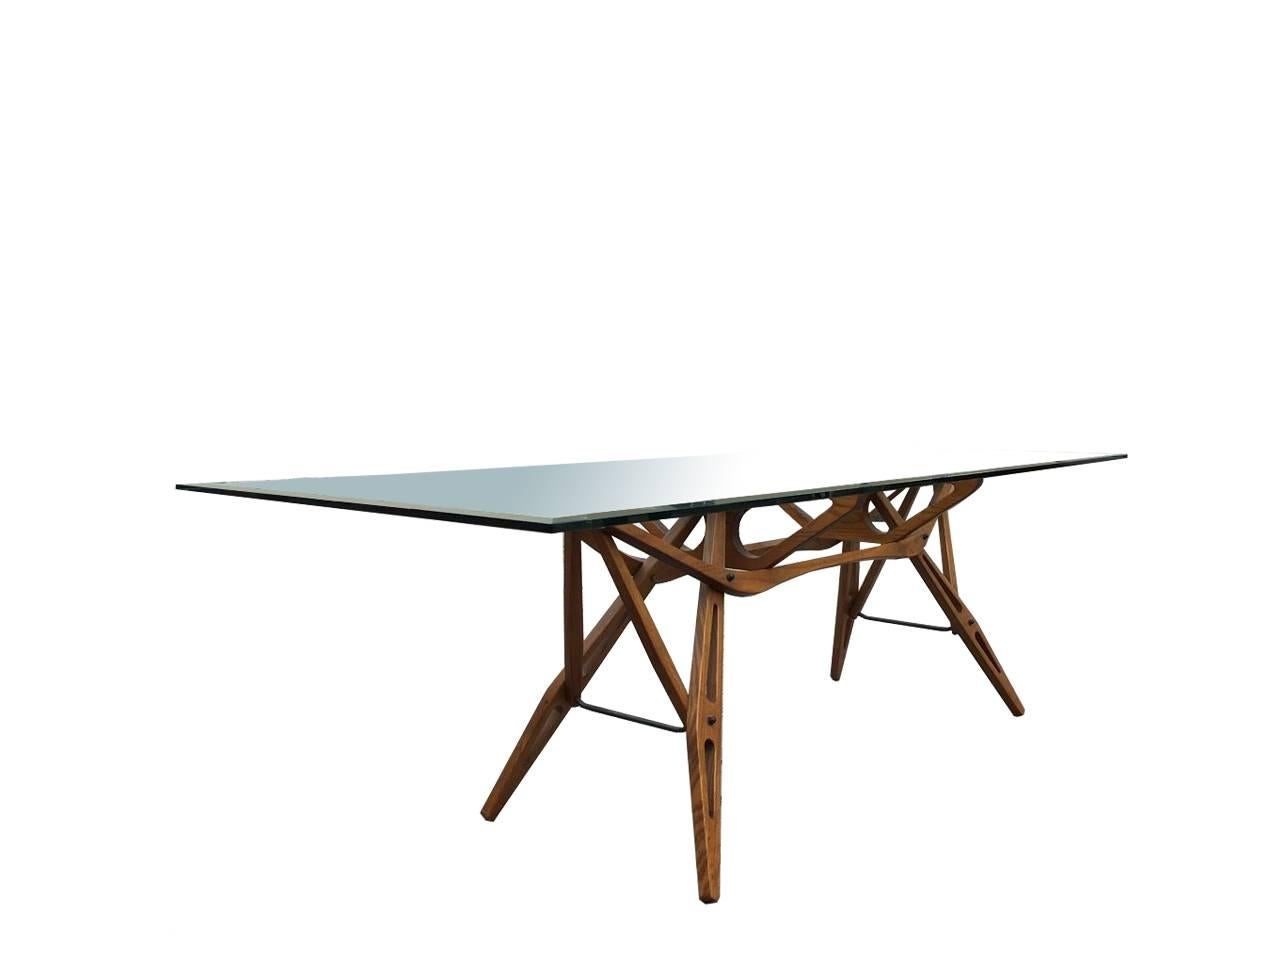 Reale table, design Carlo Mollino, Zanotta, 1990.
Designed in 1946, the Royal table consists of an elegant oak frame and the top is glass with bevelled edges.
 
Perfect for the dining room, but great as a desk, table Royal combines the elaborate